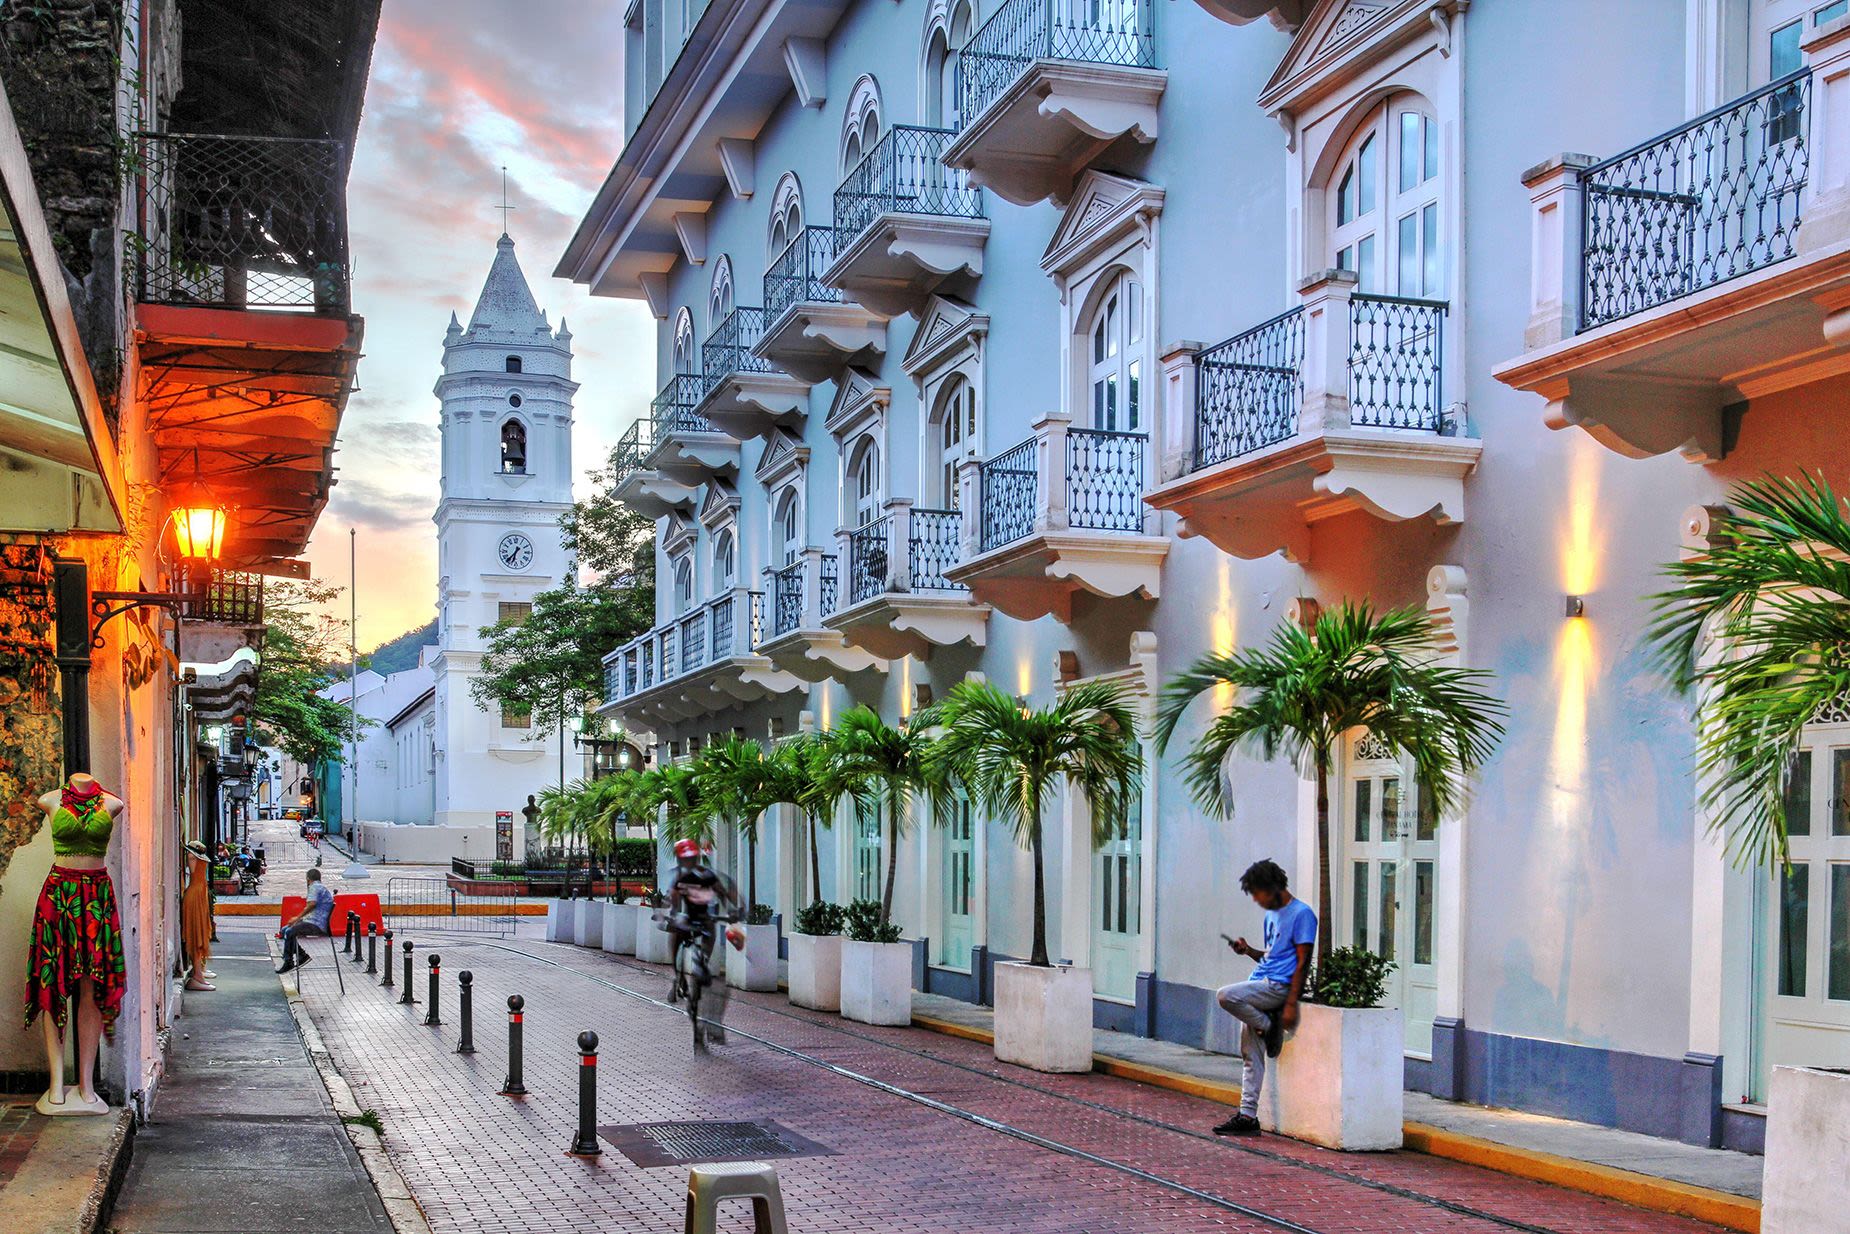 2GE7BHD Beautiful sunset on Avenida Central in Casco Viejo (Old Quarter) of Panama City. The bluish building on the right is the Hotel Central and towering ov

Bogdan Lazar/Alamy Stock Photo